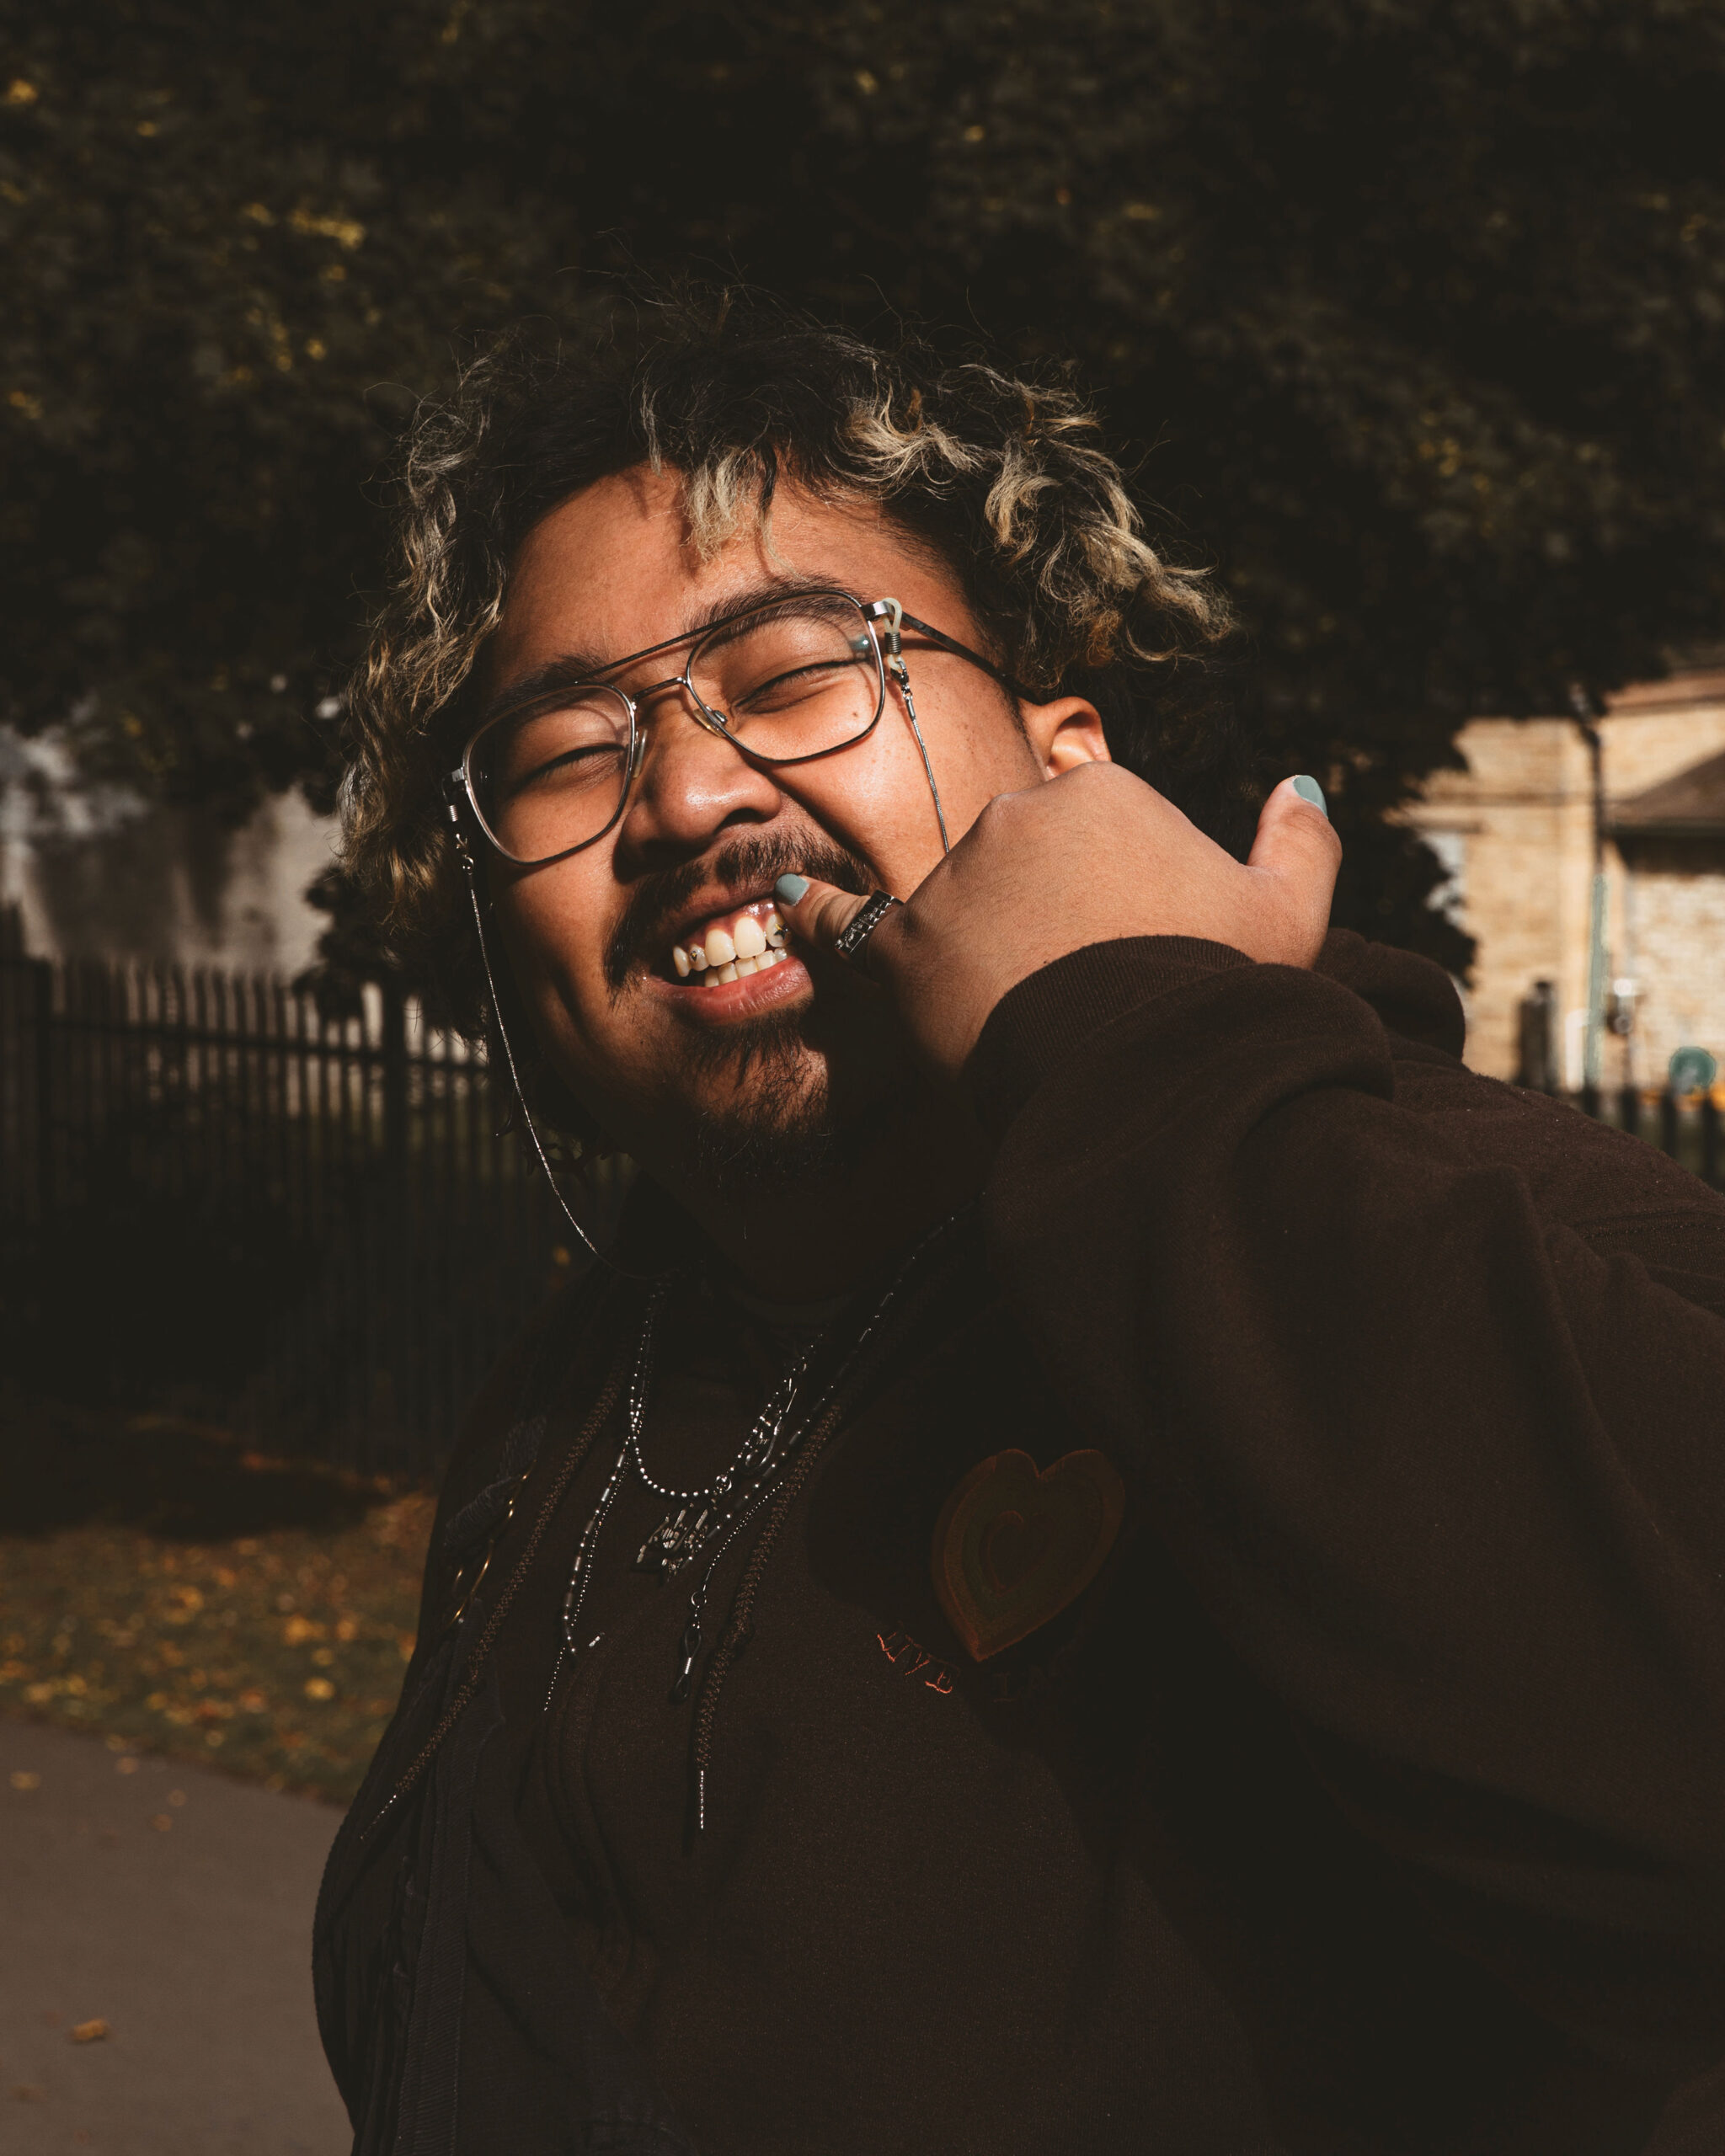 Lo-Fi Hip-Hop Producer and Artist Kendino Talks About His Latest Single “luvletters,” Teaming Up with REM$ and Mubi on it, the Power of Collaboration, His Ideas for a Debut Album and His Love of Nickelodeon